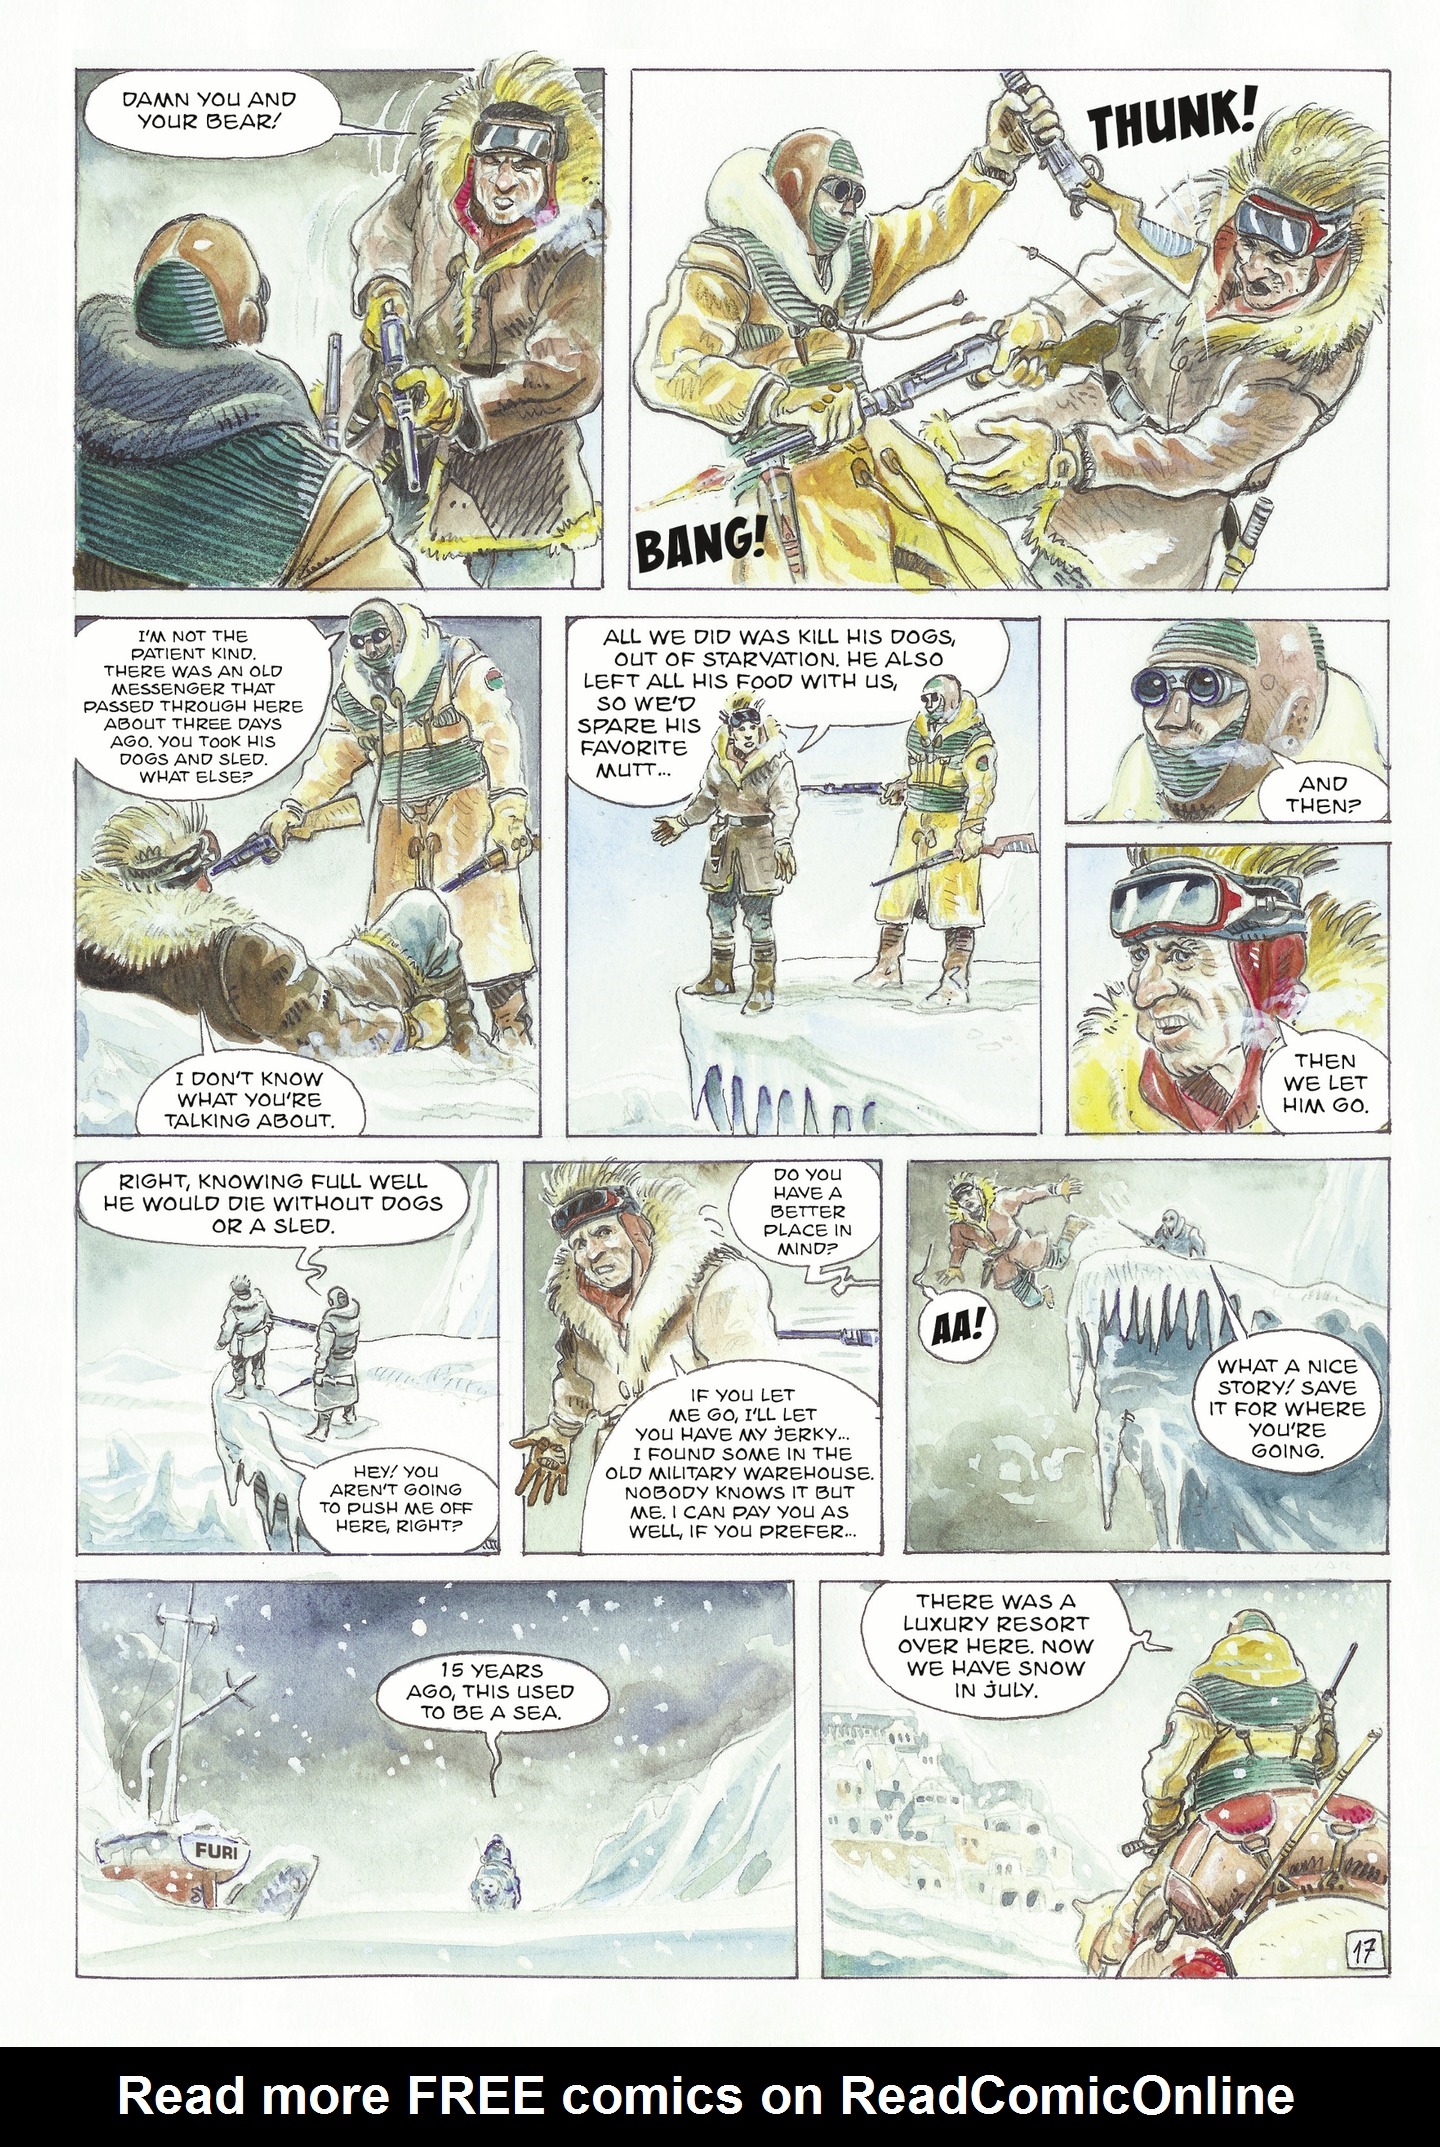 Read online The Man With the Bear comic -  Issue #1 - 19